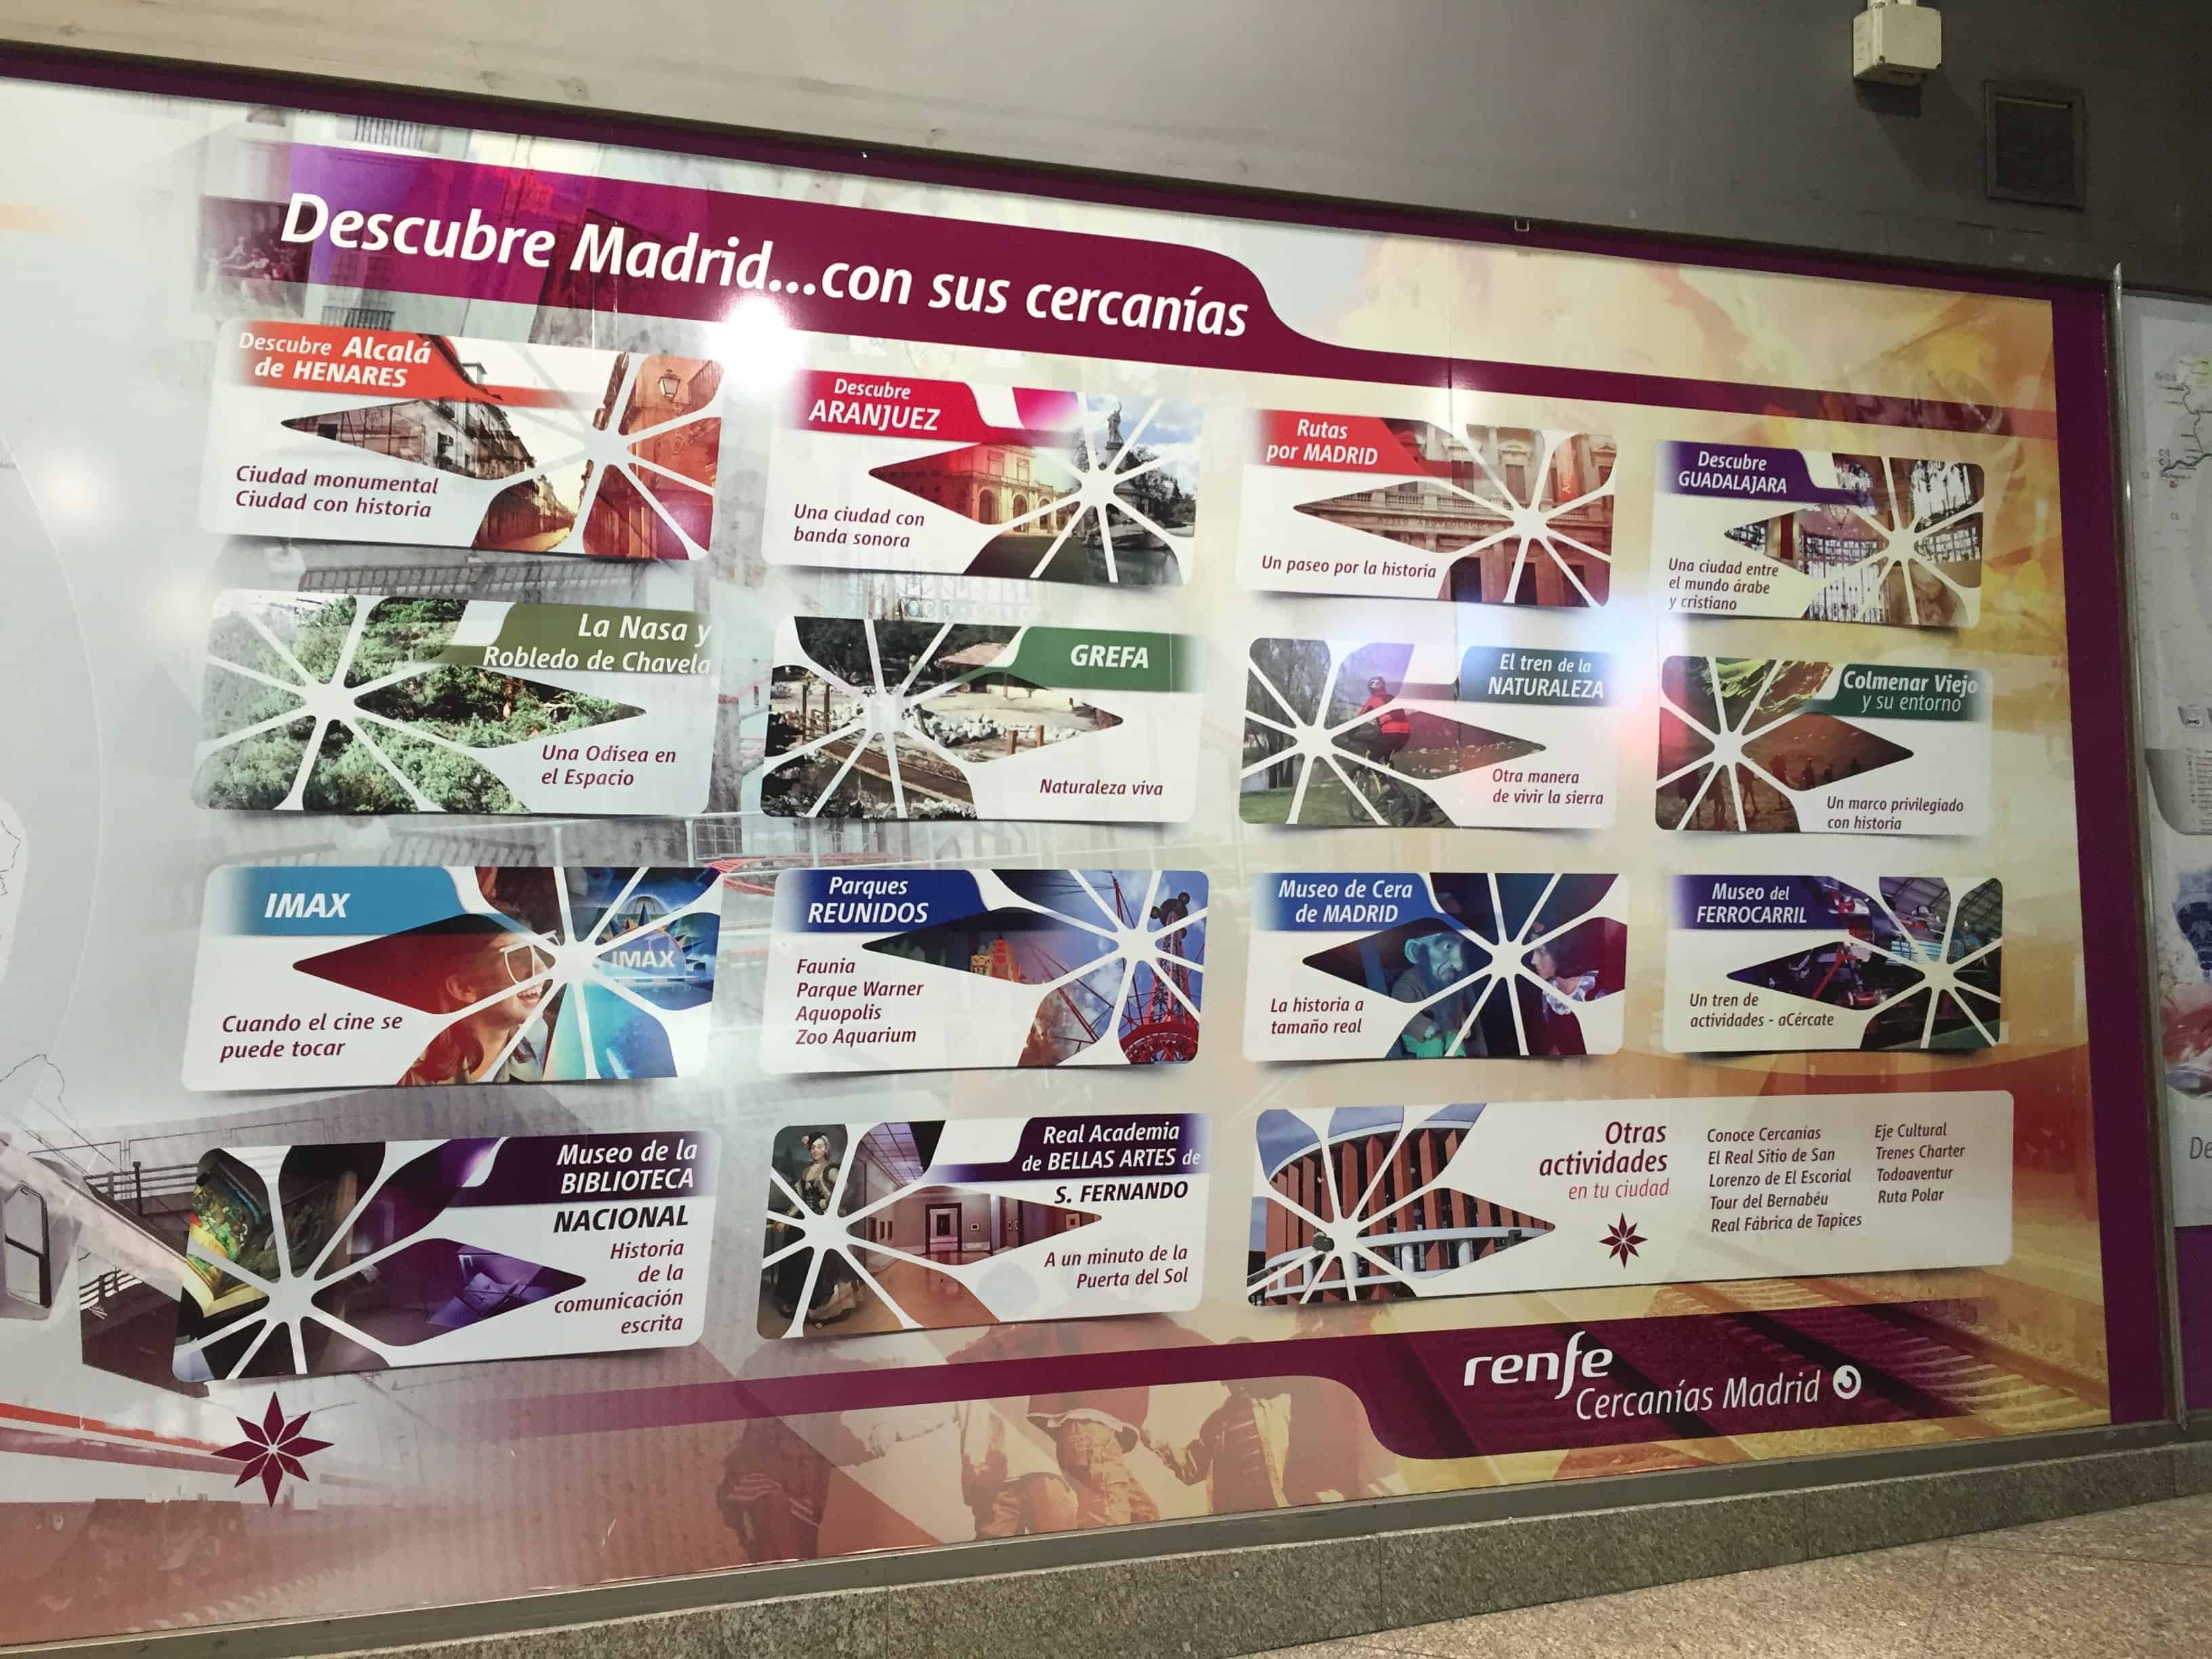 An information board at Atocha train station in Madrid, showcasing all the different points of interest that are waiting to be discovered via the Cercanias trains. Aside from café con leche, I really miss the transportation system in Madrid!